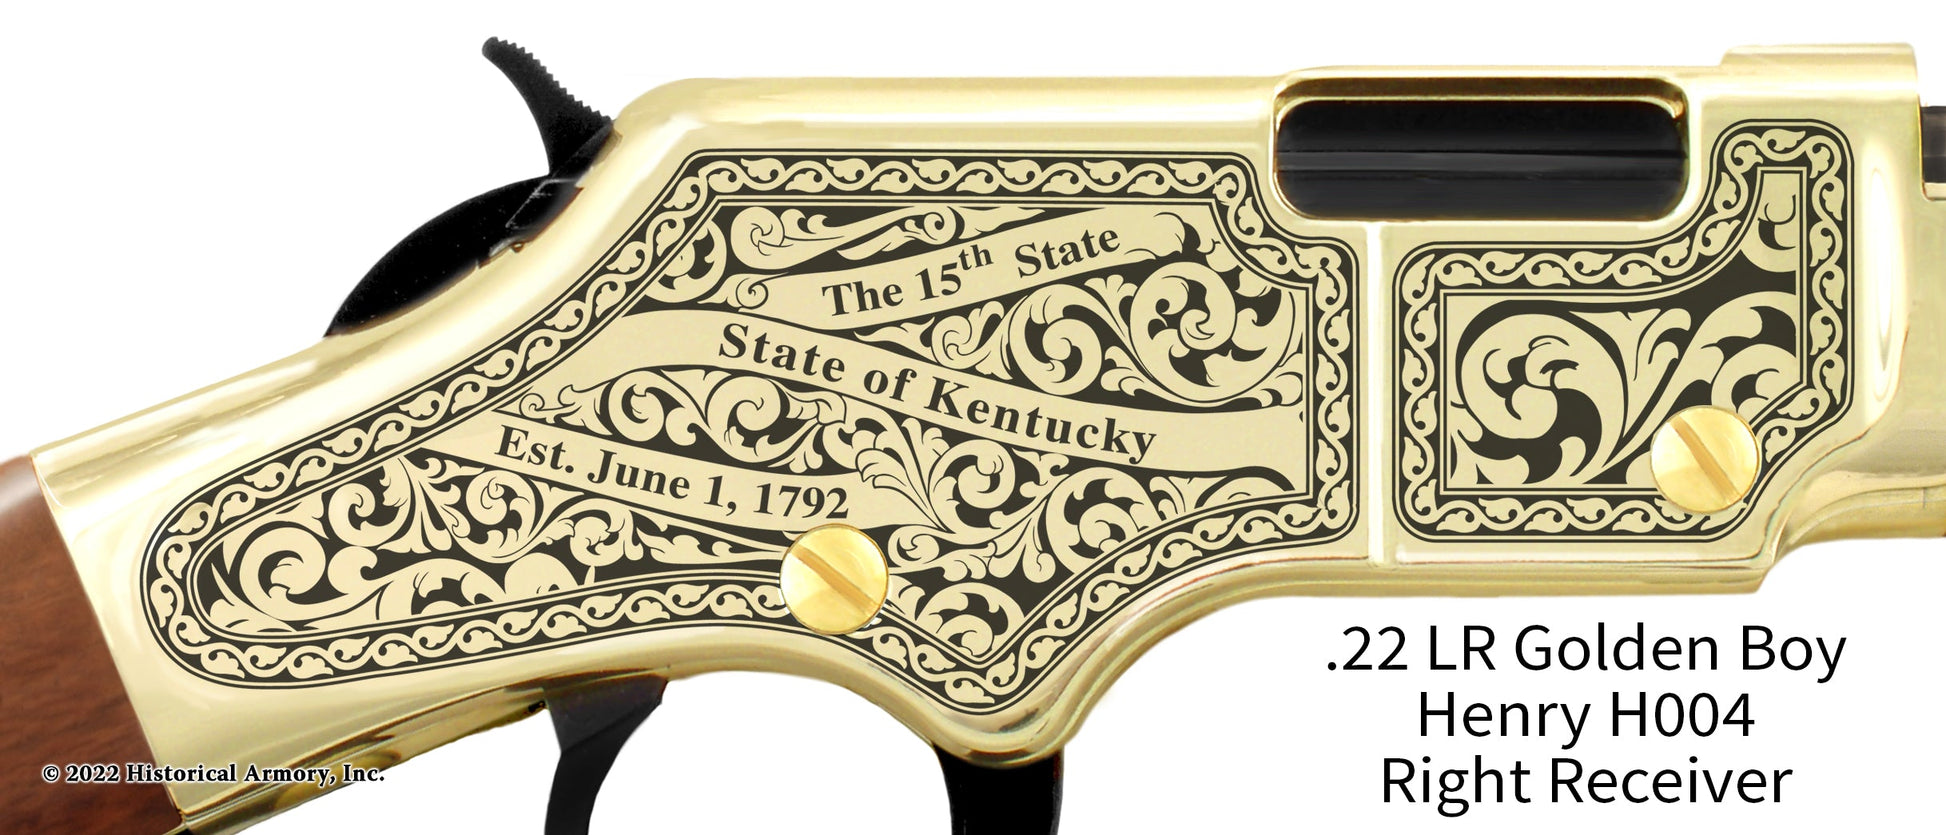 Pike County Kentucky Engraved Rifle – Historical Armory